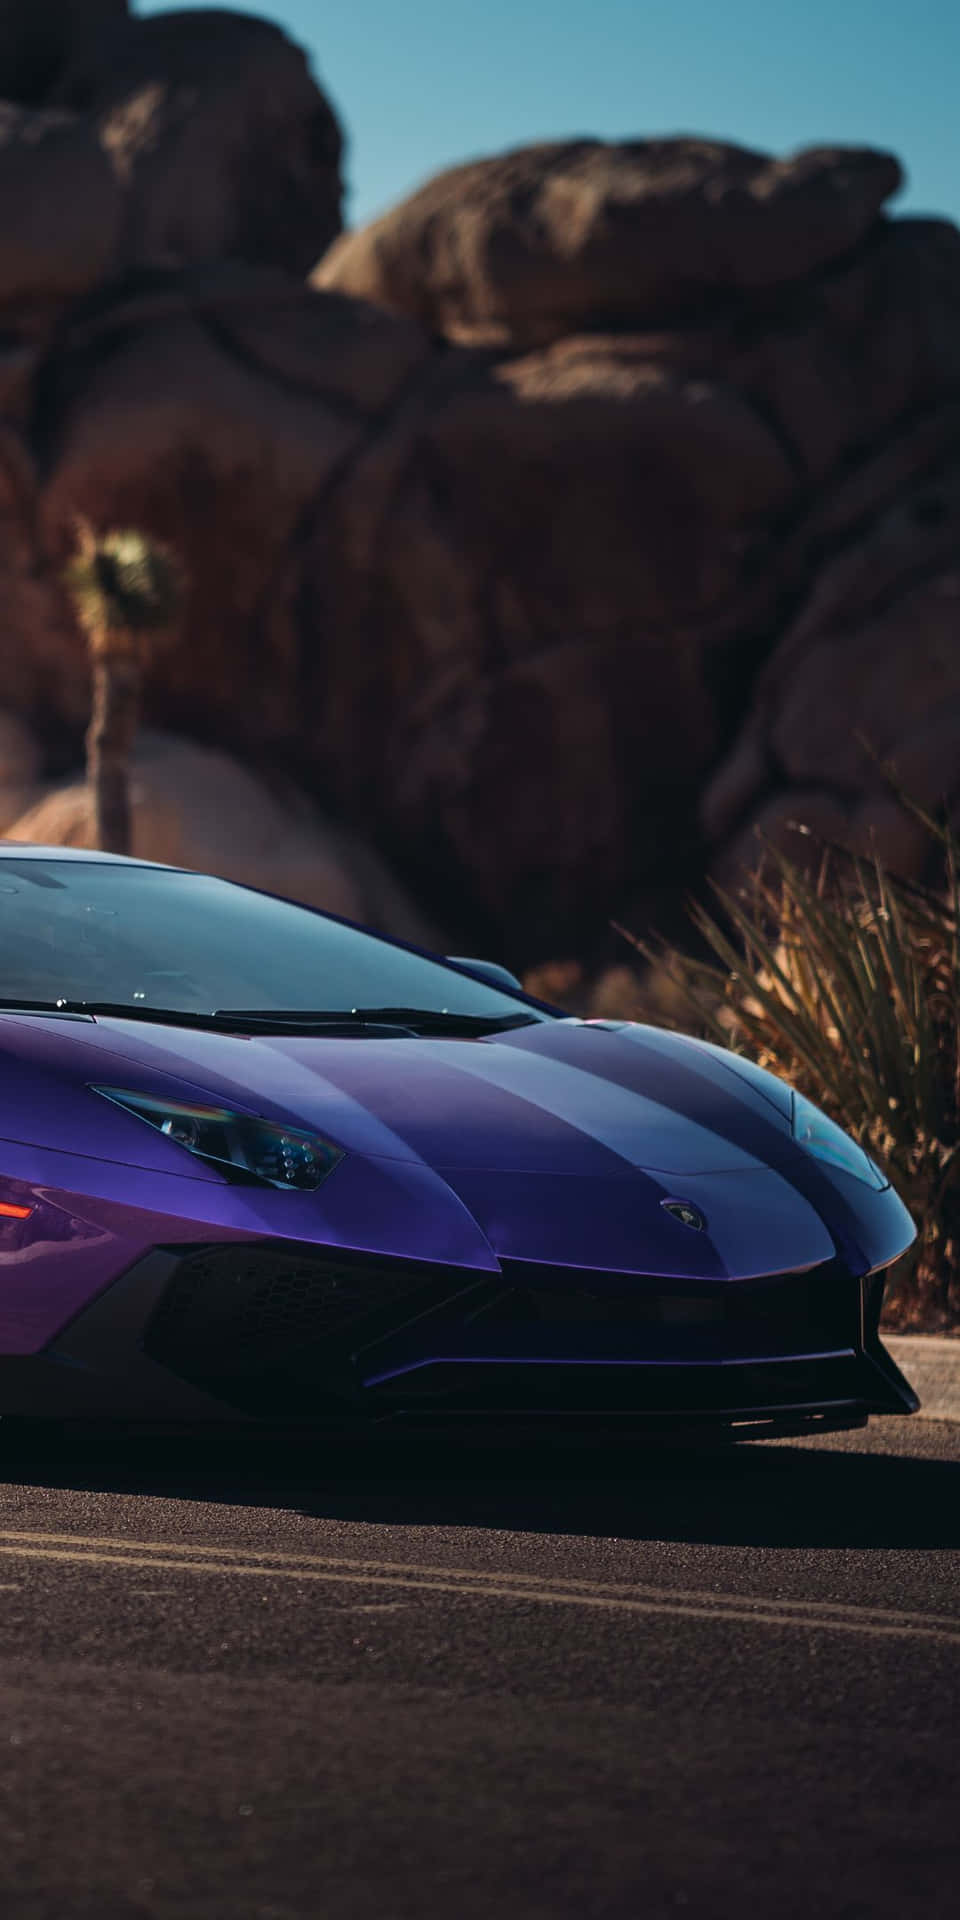 Get behind the wheel of the world's highest performing cars, with the revolutionary Pixel 3 Lamborghini.